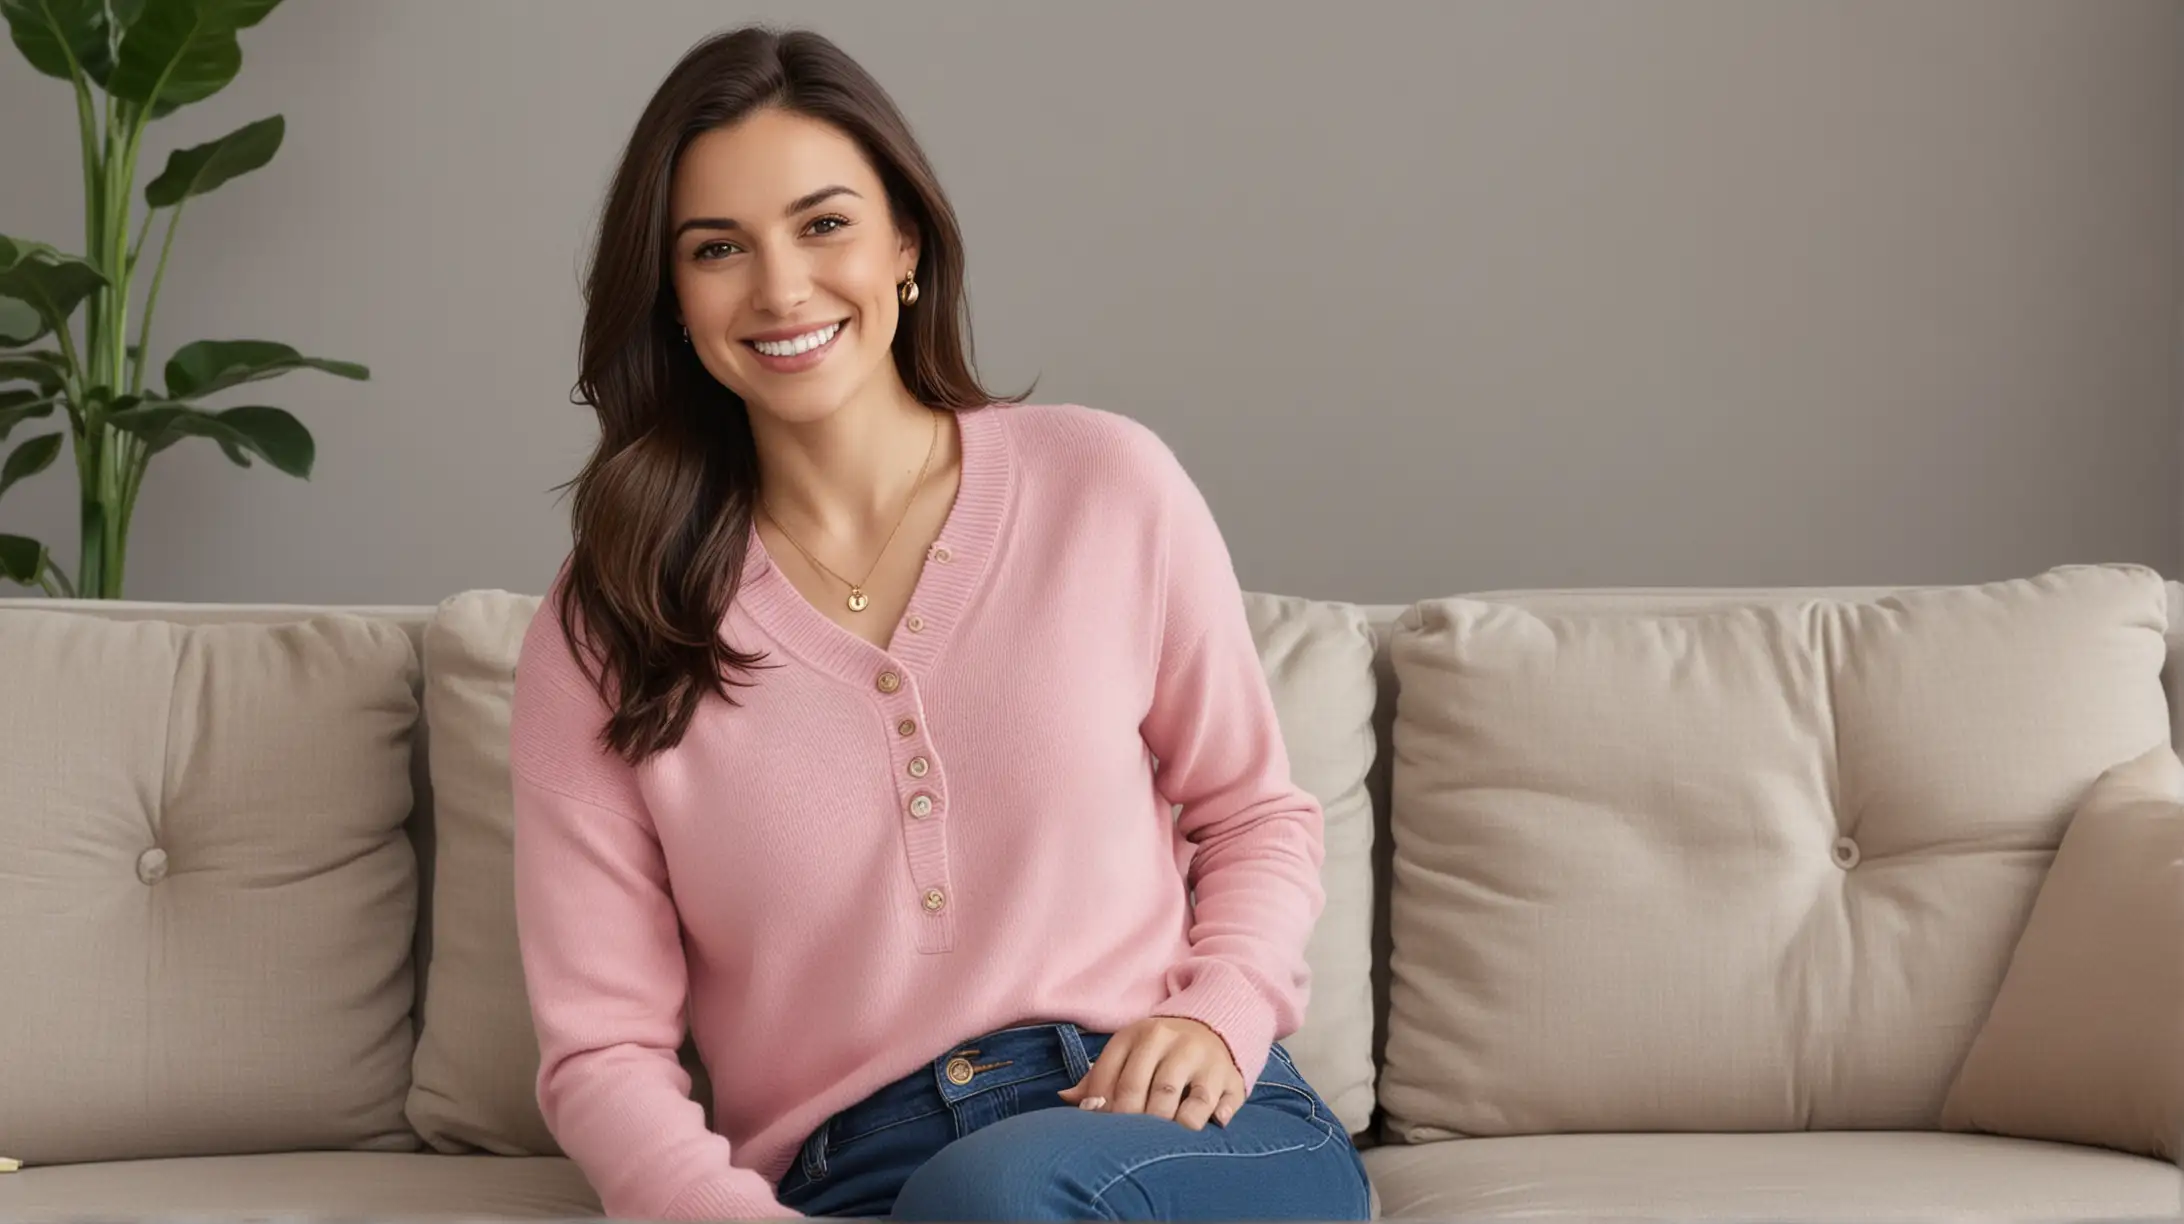 Smiling 30YearOld Woman Relaxing on Gray Couch in Modern Apartment